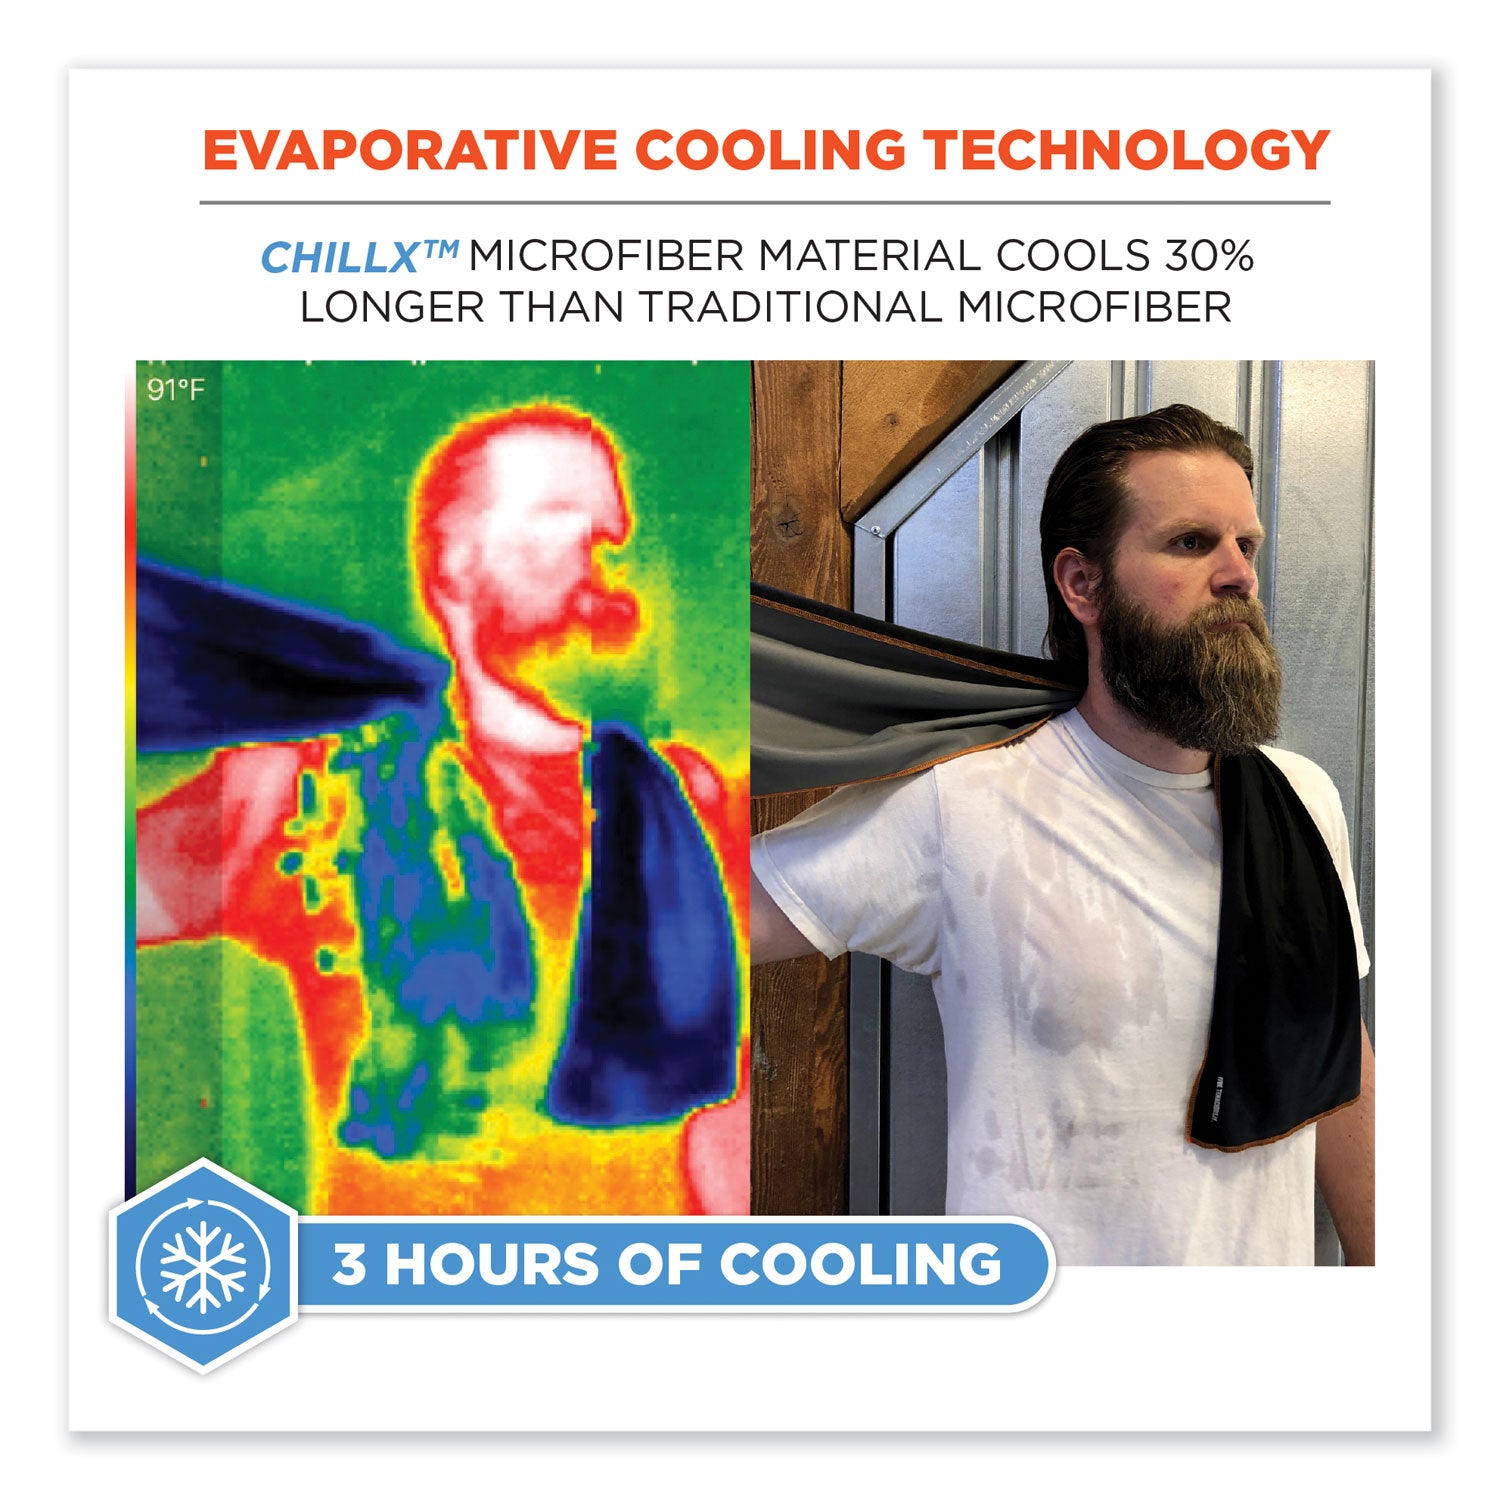 chill-its-6602mf-evaporative-microfiber-cooling-towel-409-x-98-one-size-microfiber-blue-ships-in-1-3-business-days_ego12660 - 2